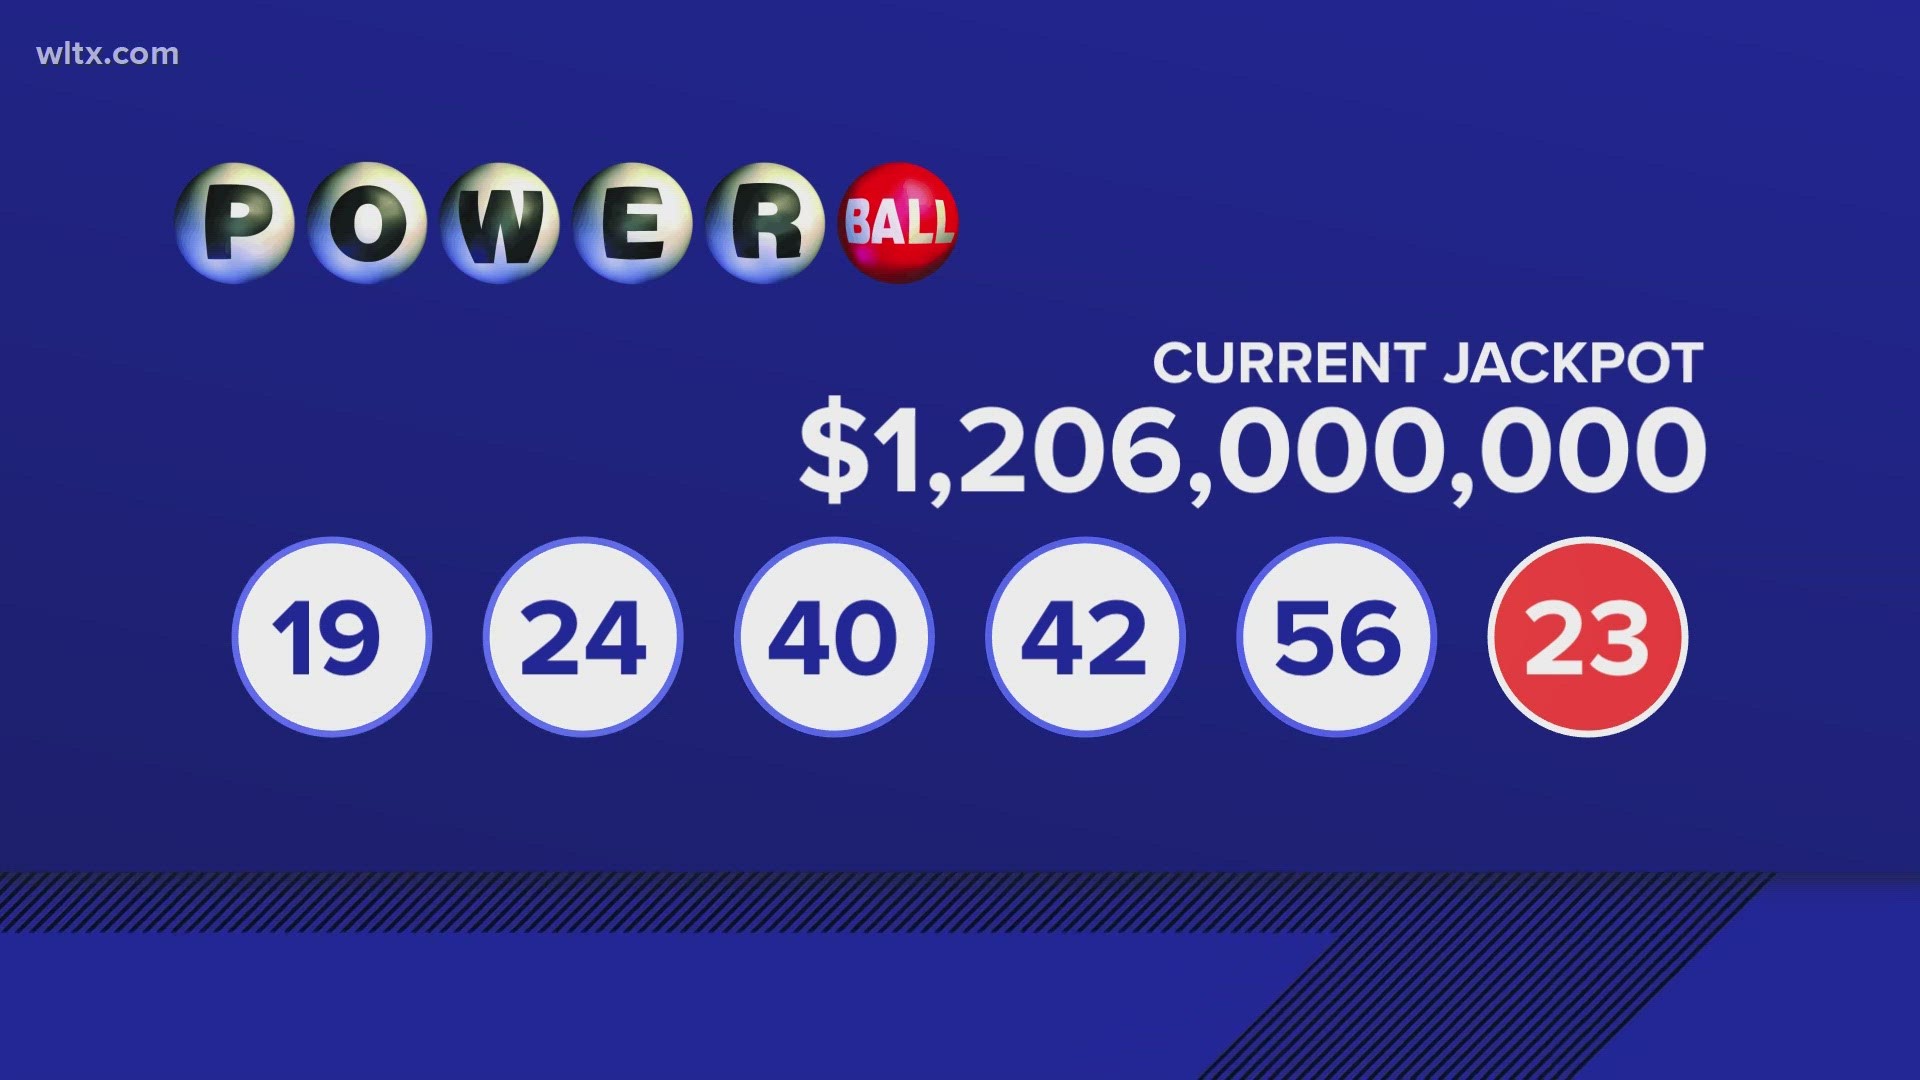 As you can imagine, ticket sales were brisk.  The winning numbers are 19, 24, 40, 42, 56, and the Powerball is 23 and powerplay is 2x.